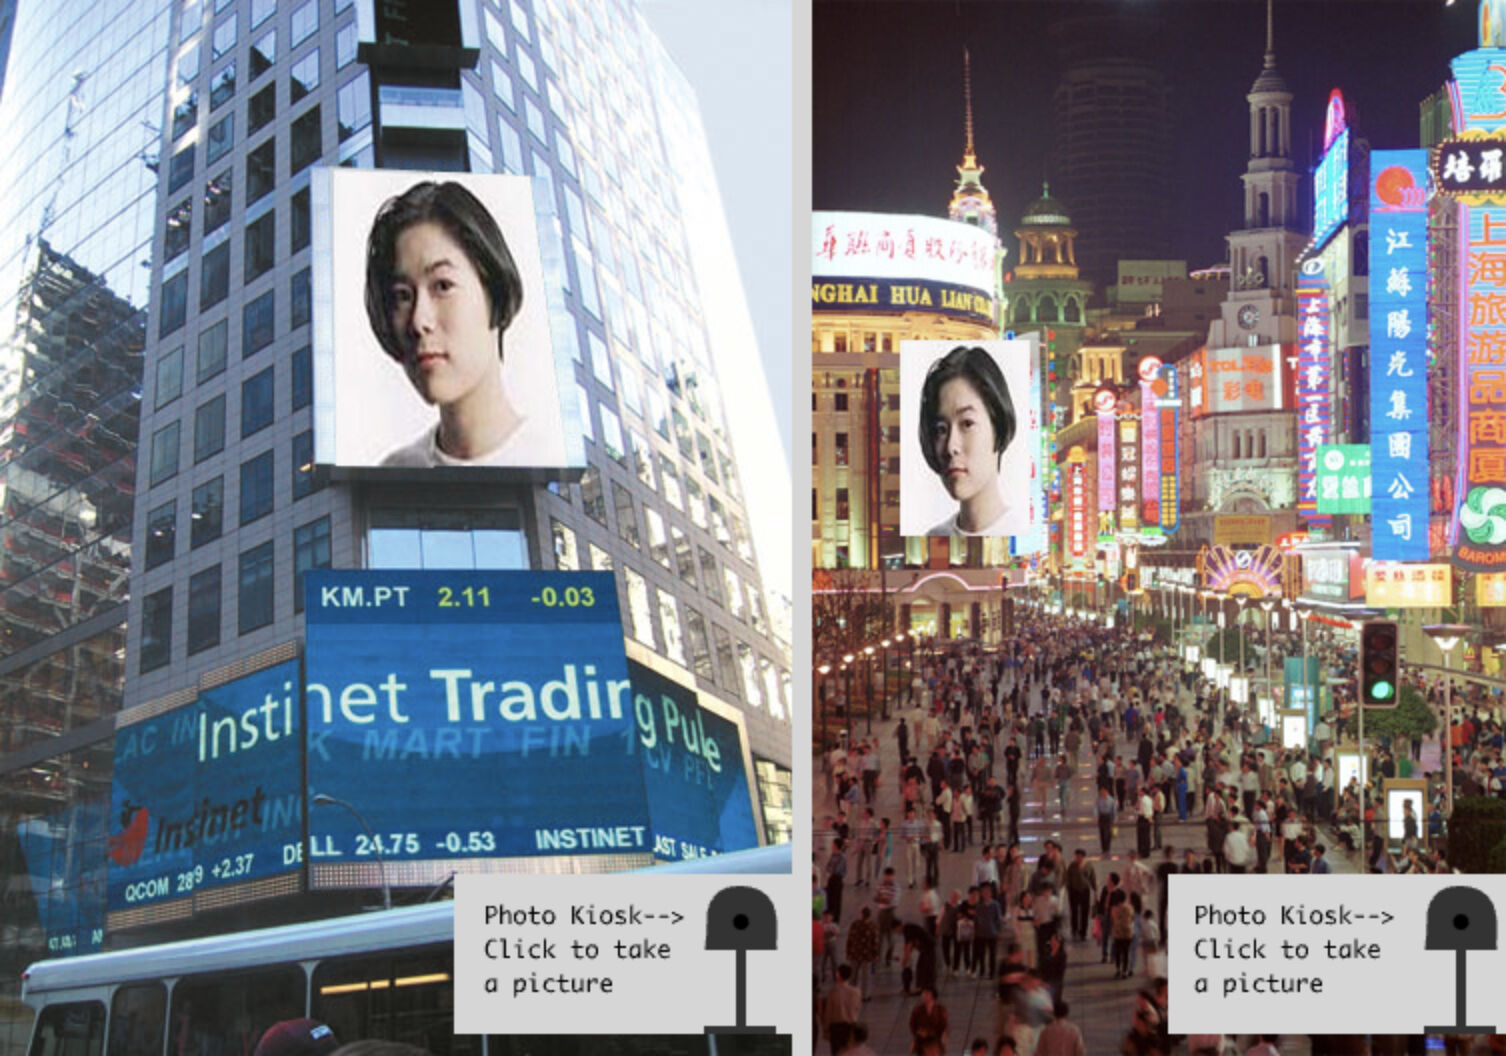 Images of downtowns in 2 cities side by side, one American one Chinese, with the same portrait of a woman on screens on buildings in each.